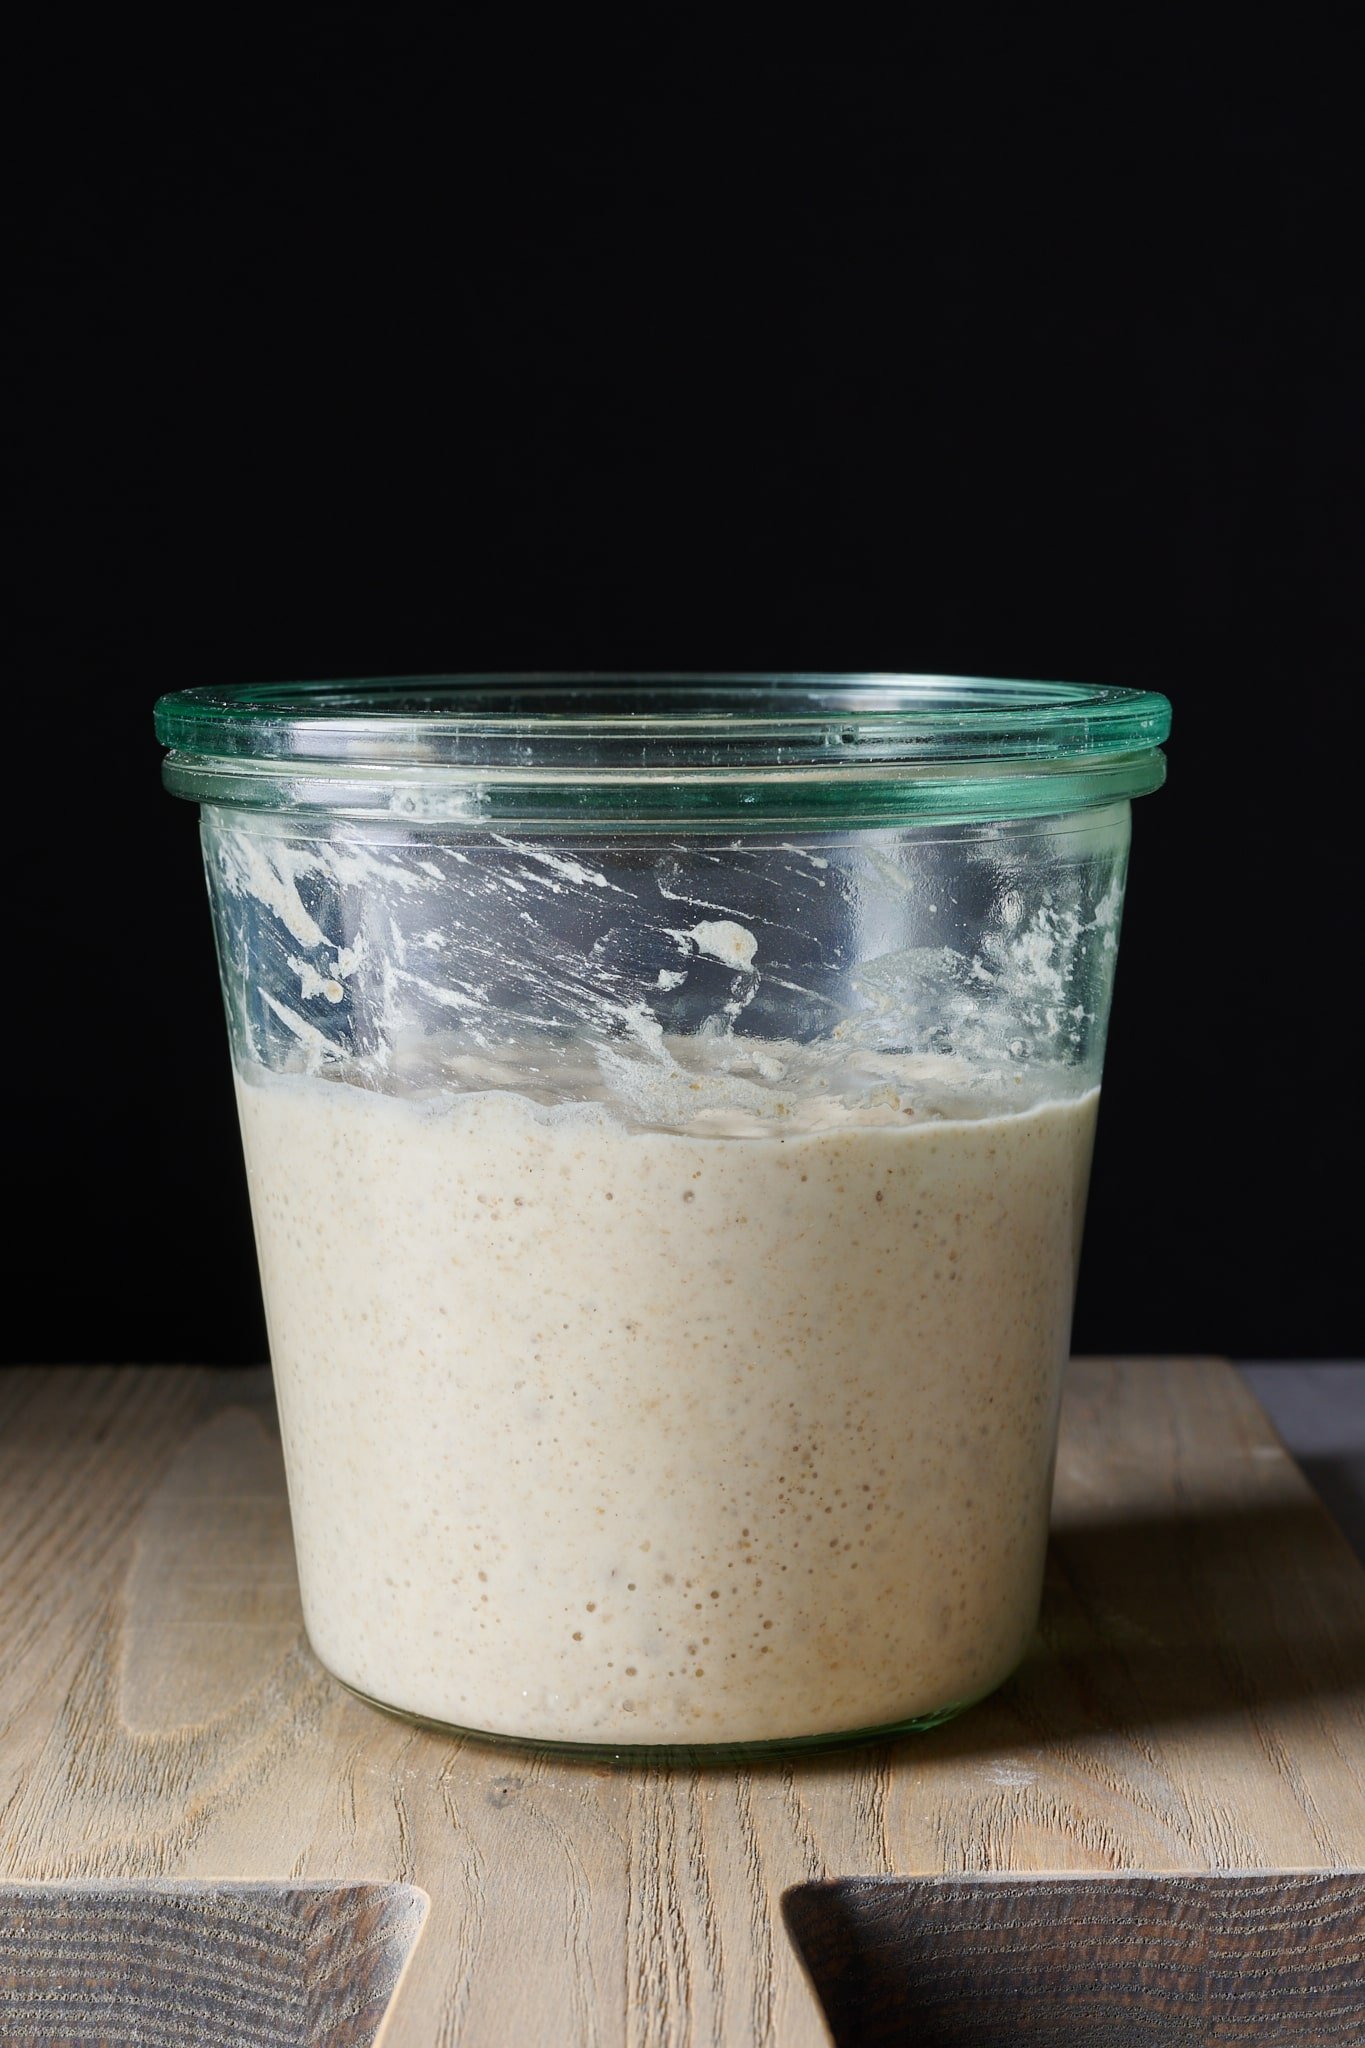 Feed your starter less with the Sourdough Home